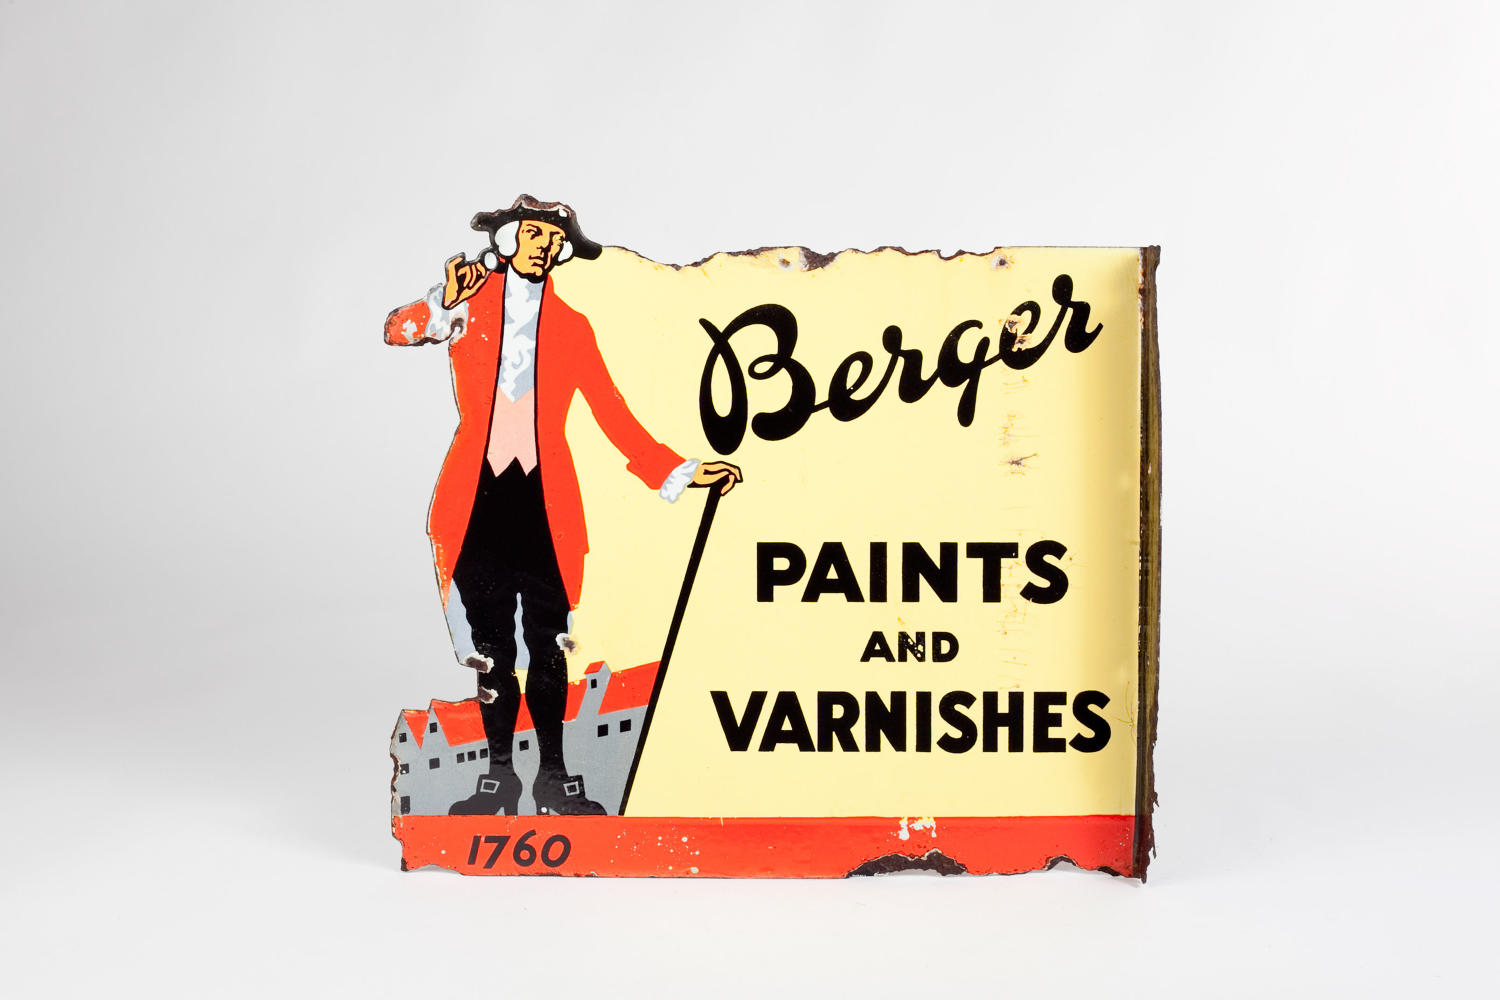 Enamel advertisng sign for 'Berger Paints and Varnishes'